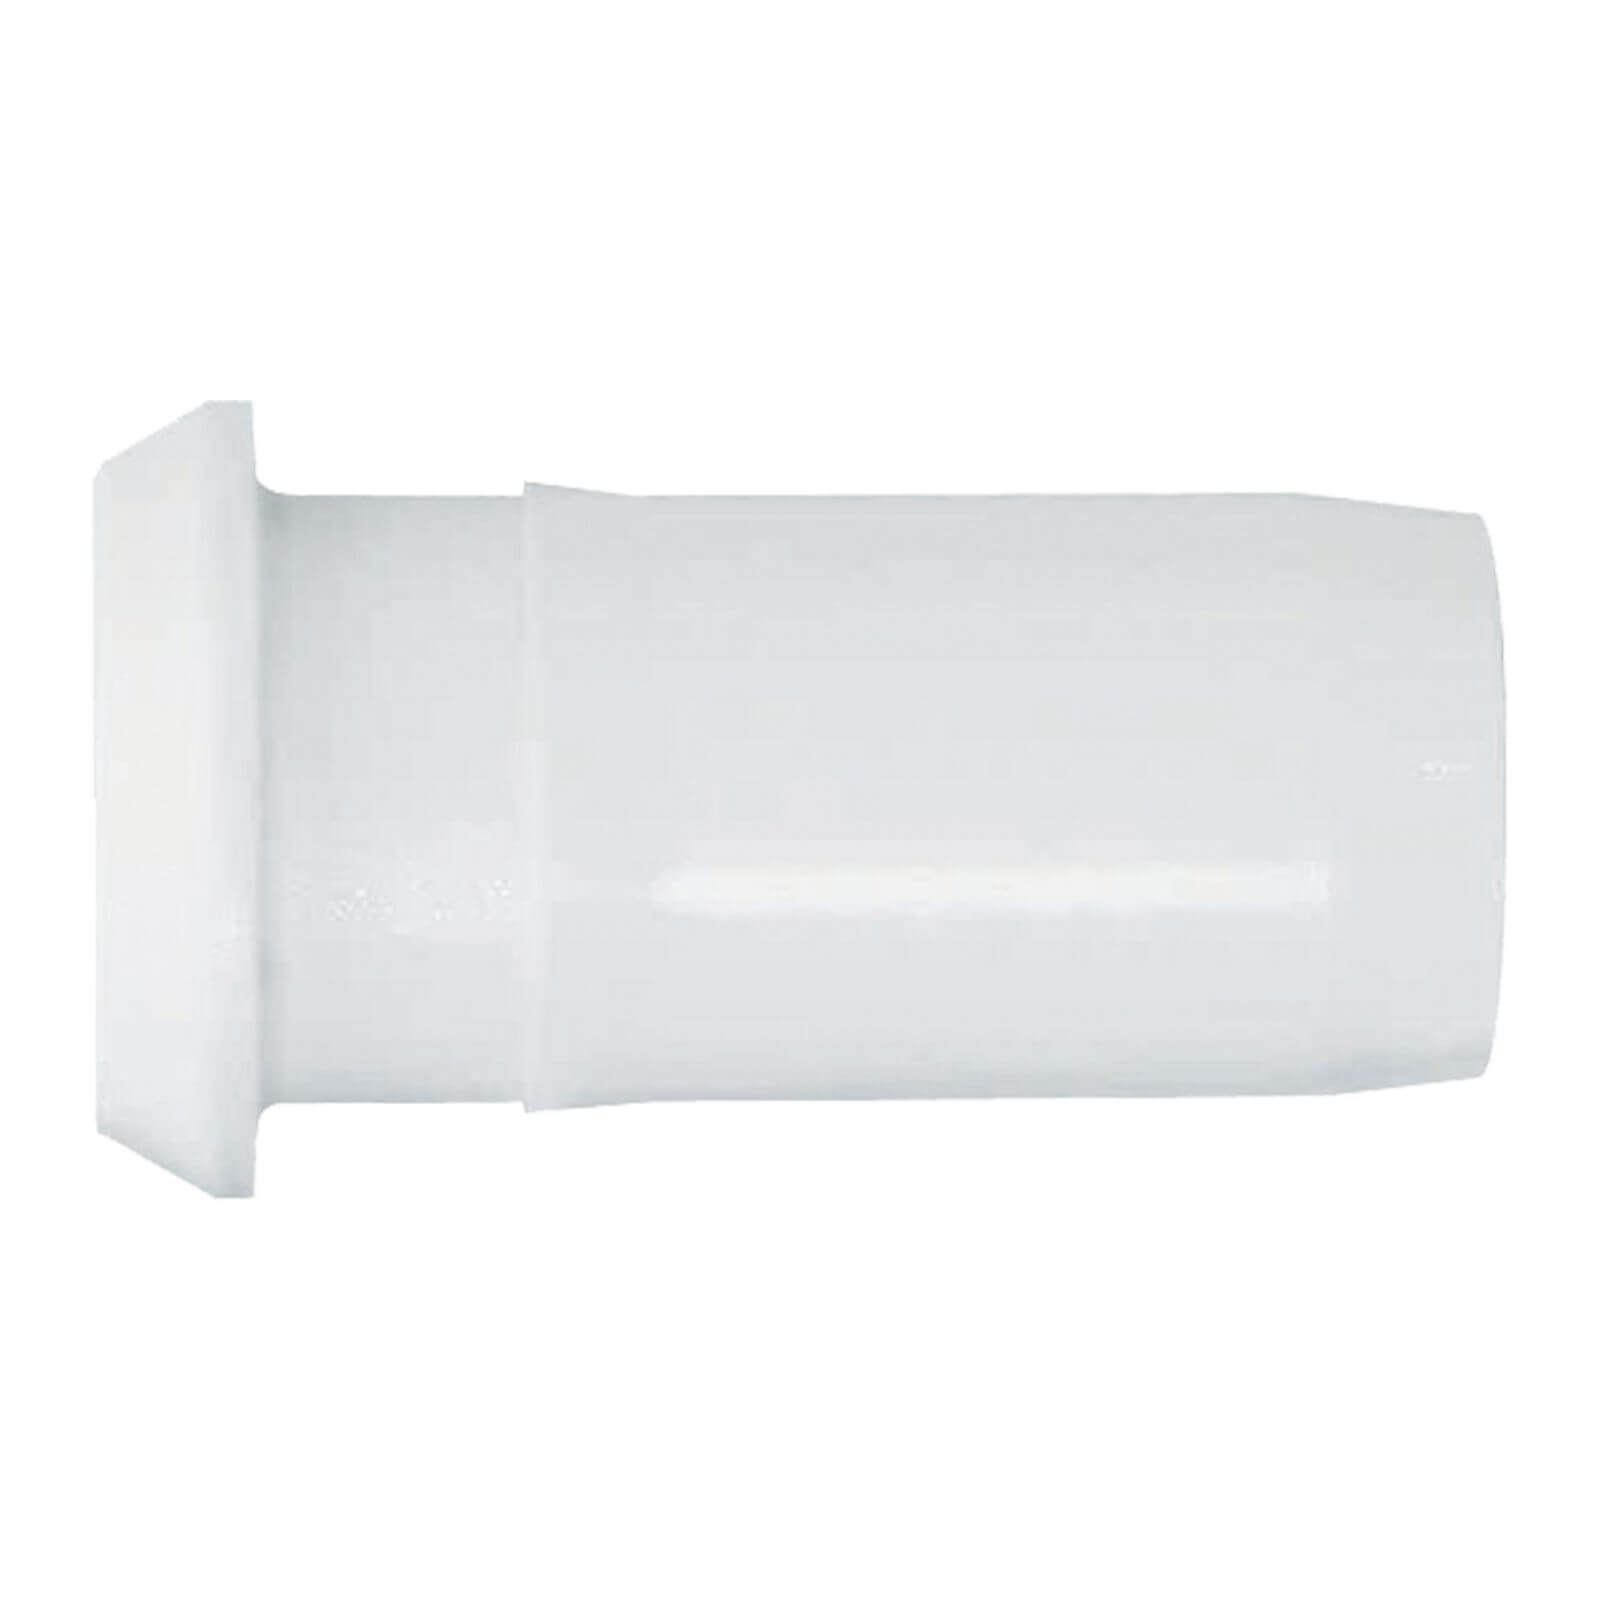 Photo of Jg Speedfit Pipe Inserts - 22mm - 5 Pack